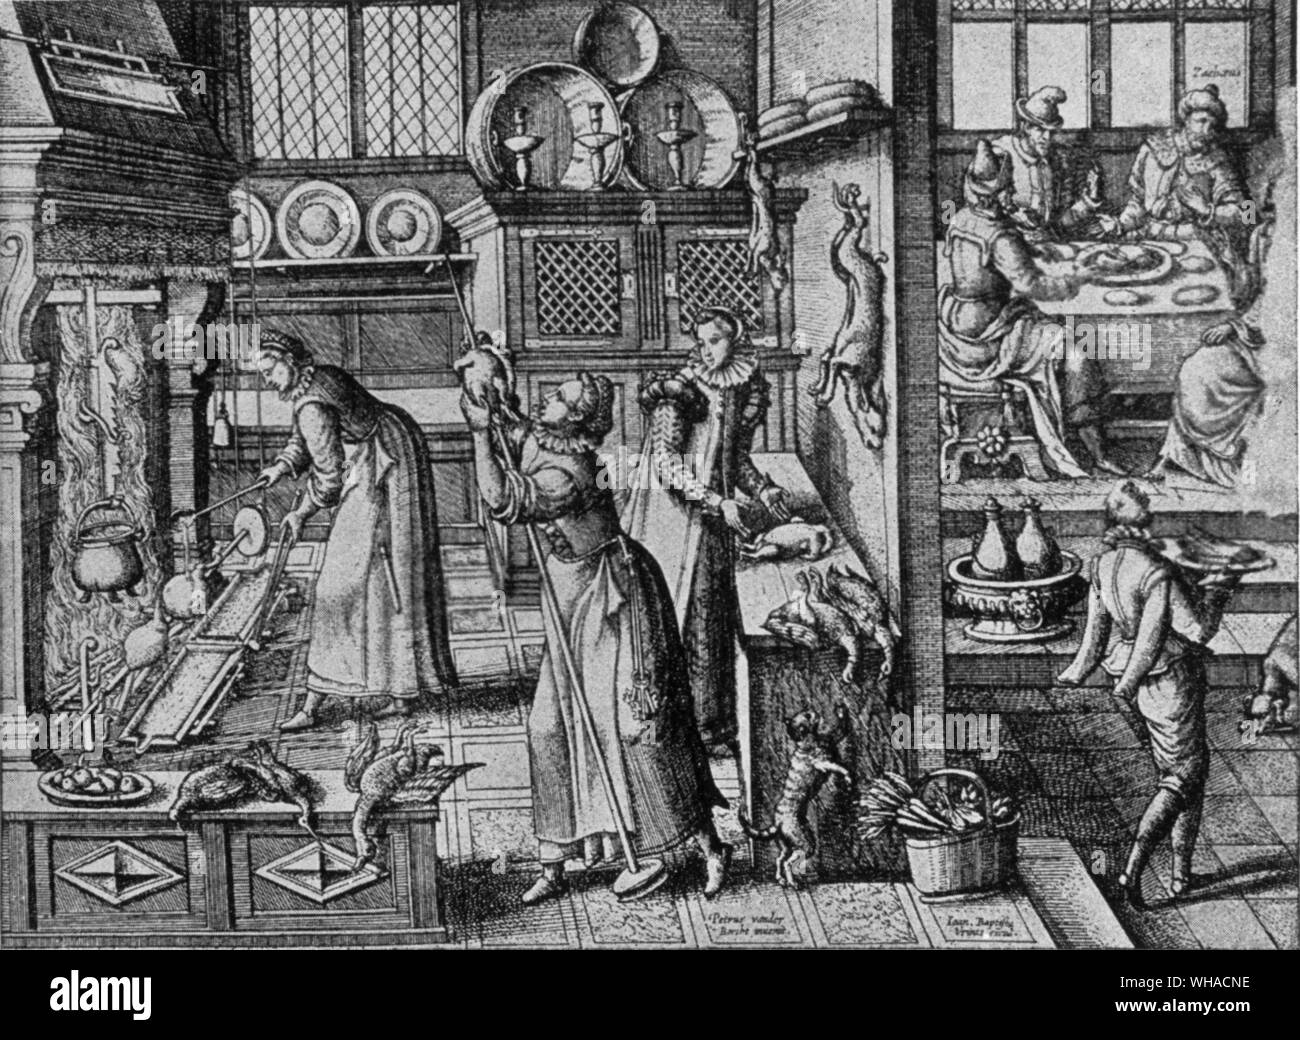 A XVI century kitchen and dining room from an engraving by J B Vries after P Van der Borcht illustrating a Biblical scene Stock Photo